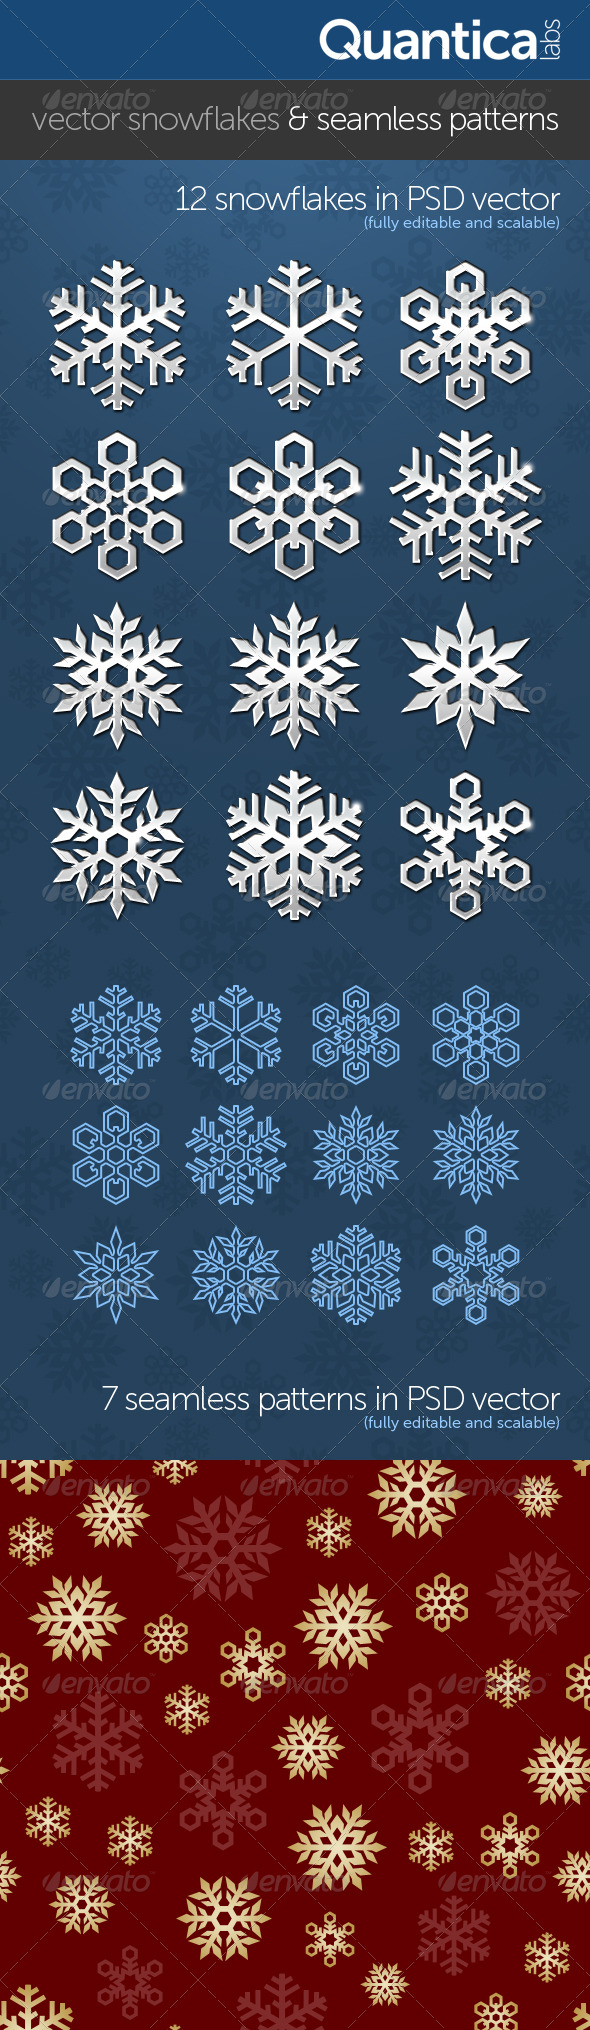 Vector Snowflakes With Seamless Patterns